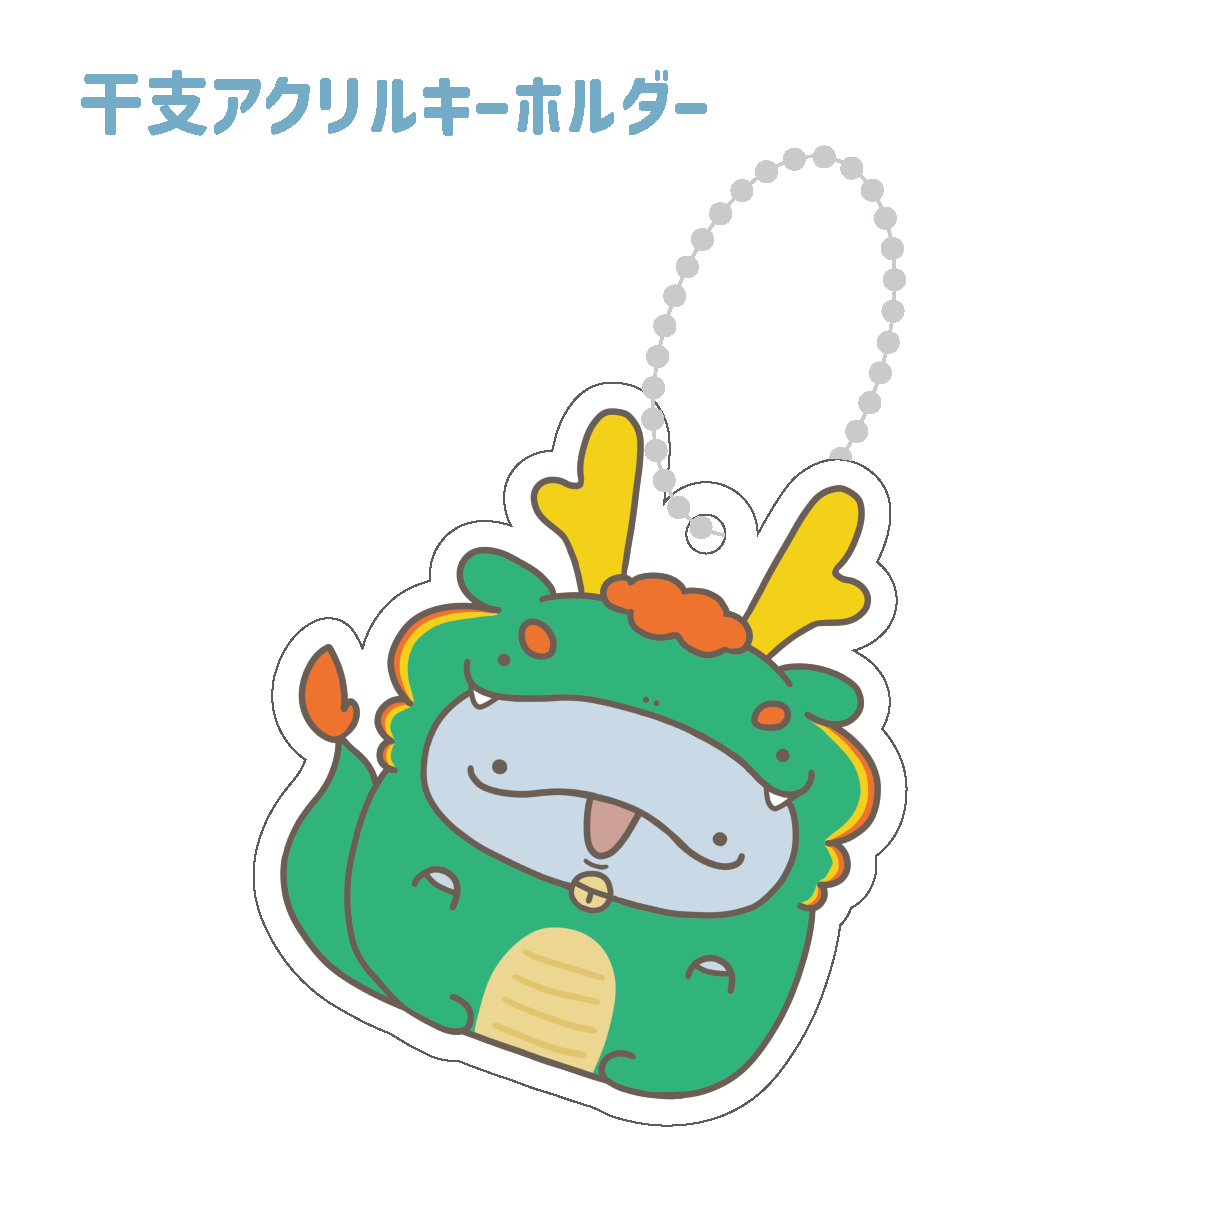 [Parent and child dolphin] Zodiac acrylic keychain [shipped in mid-January]